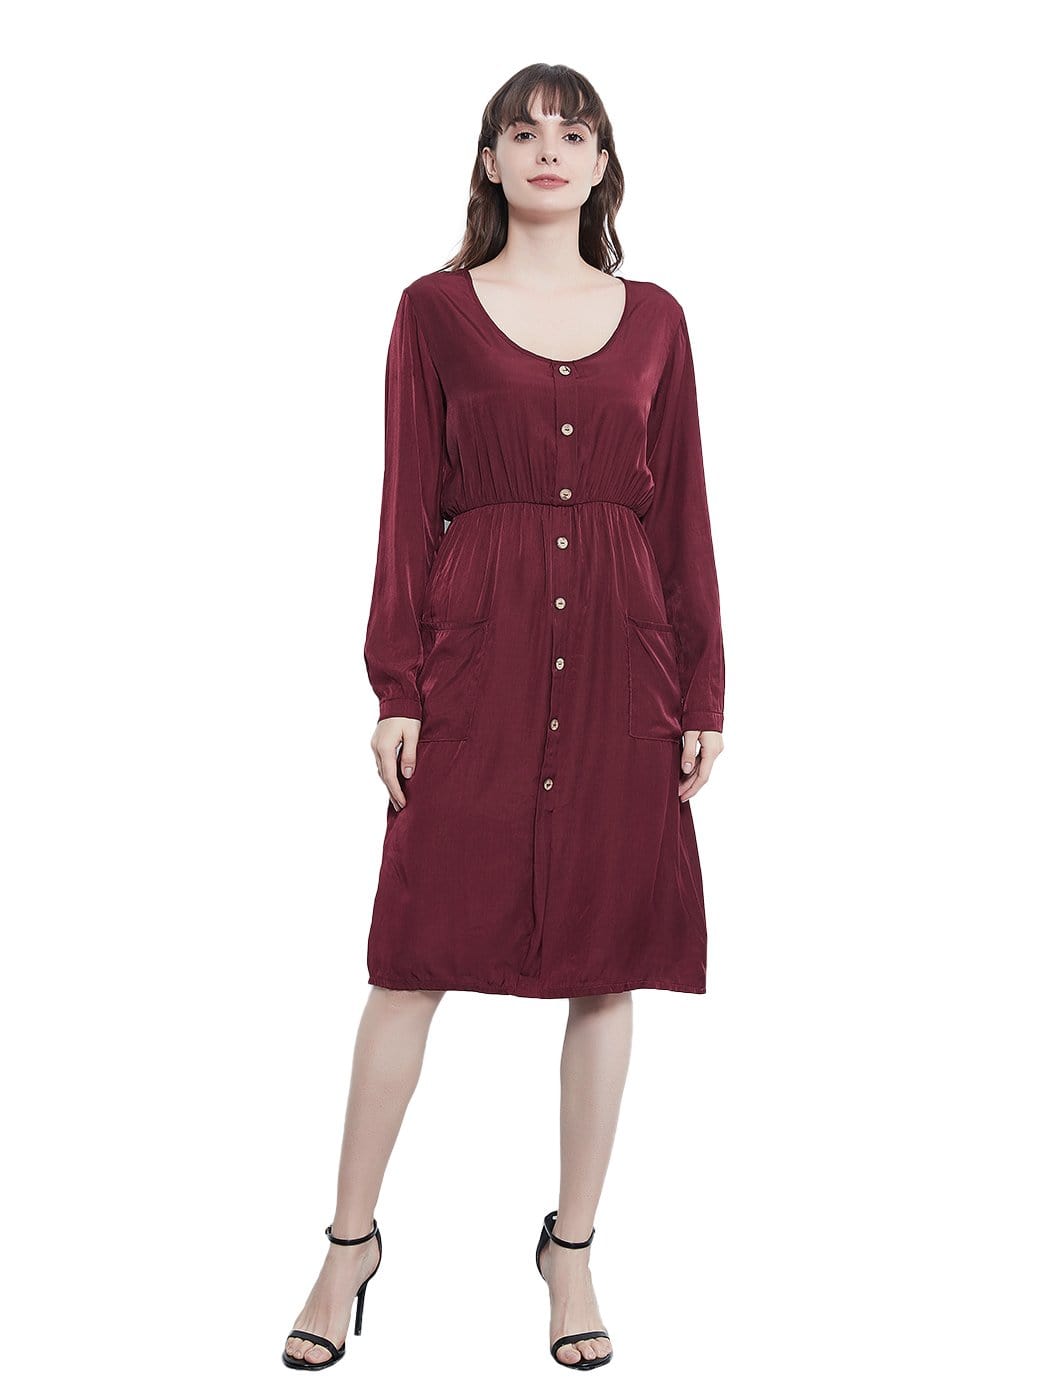 Long Sleeve Round Neck Button Dress With Pockets